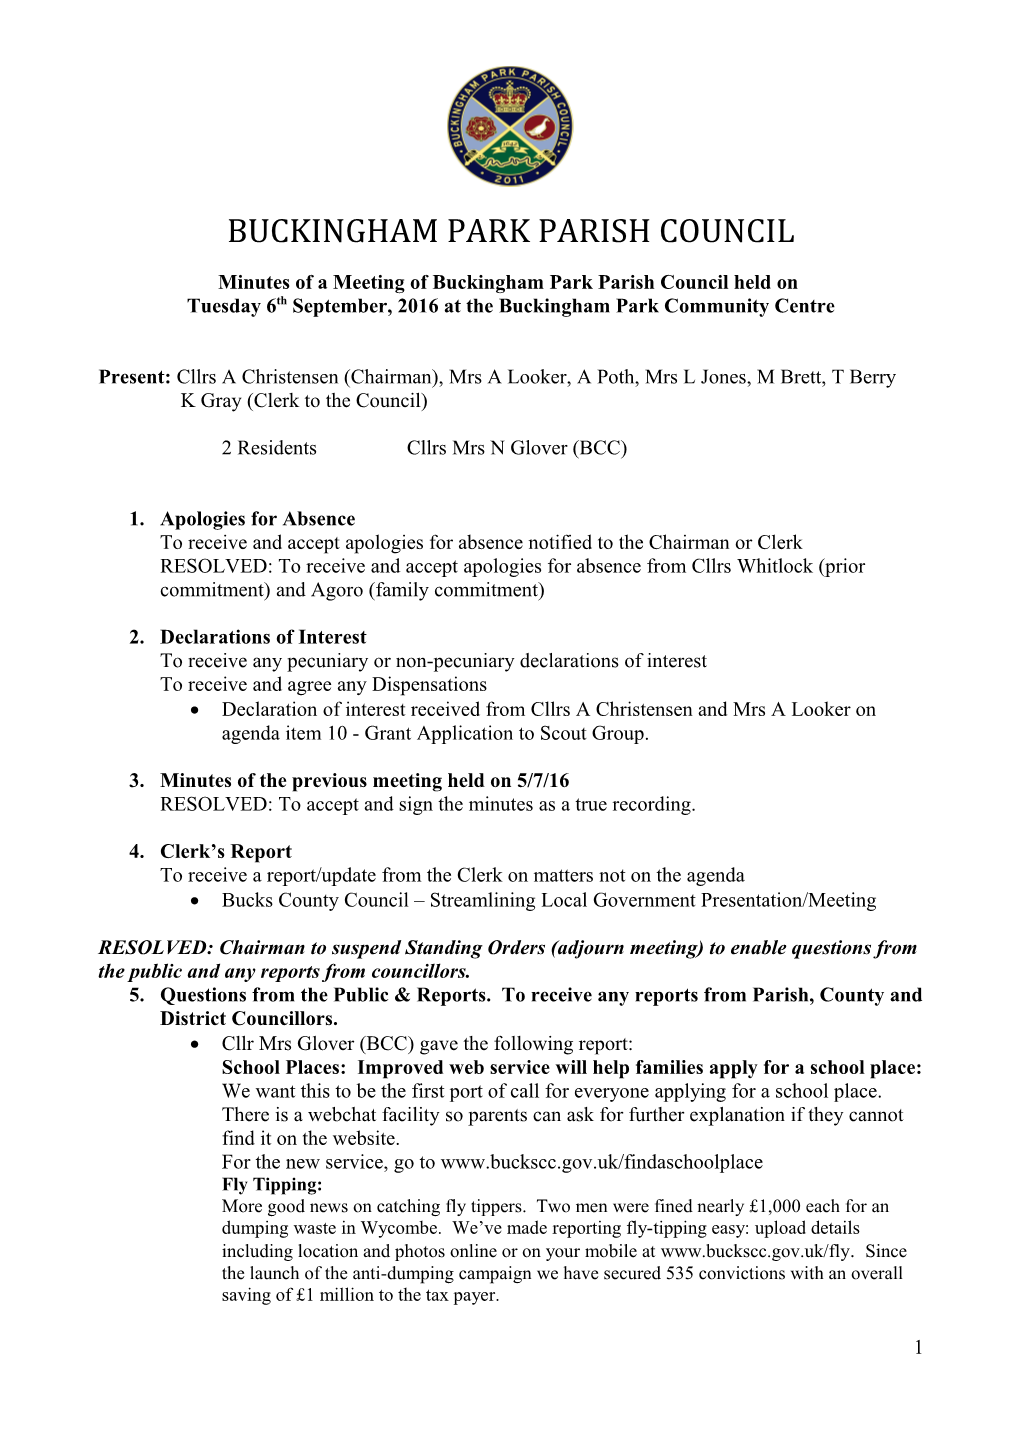 Minutes of a Meeting of Buckingham Park Parish Council Held On